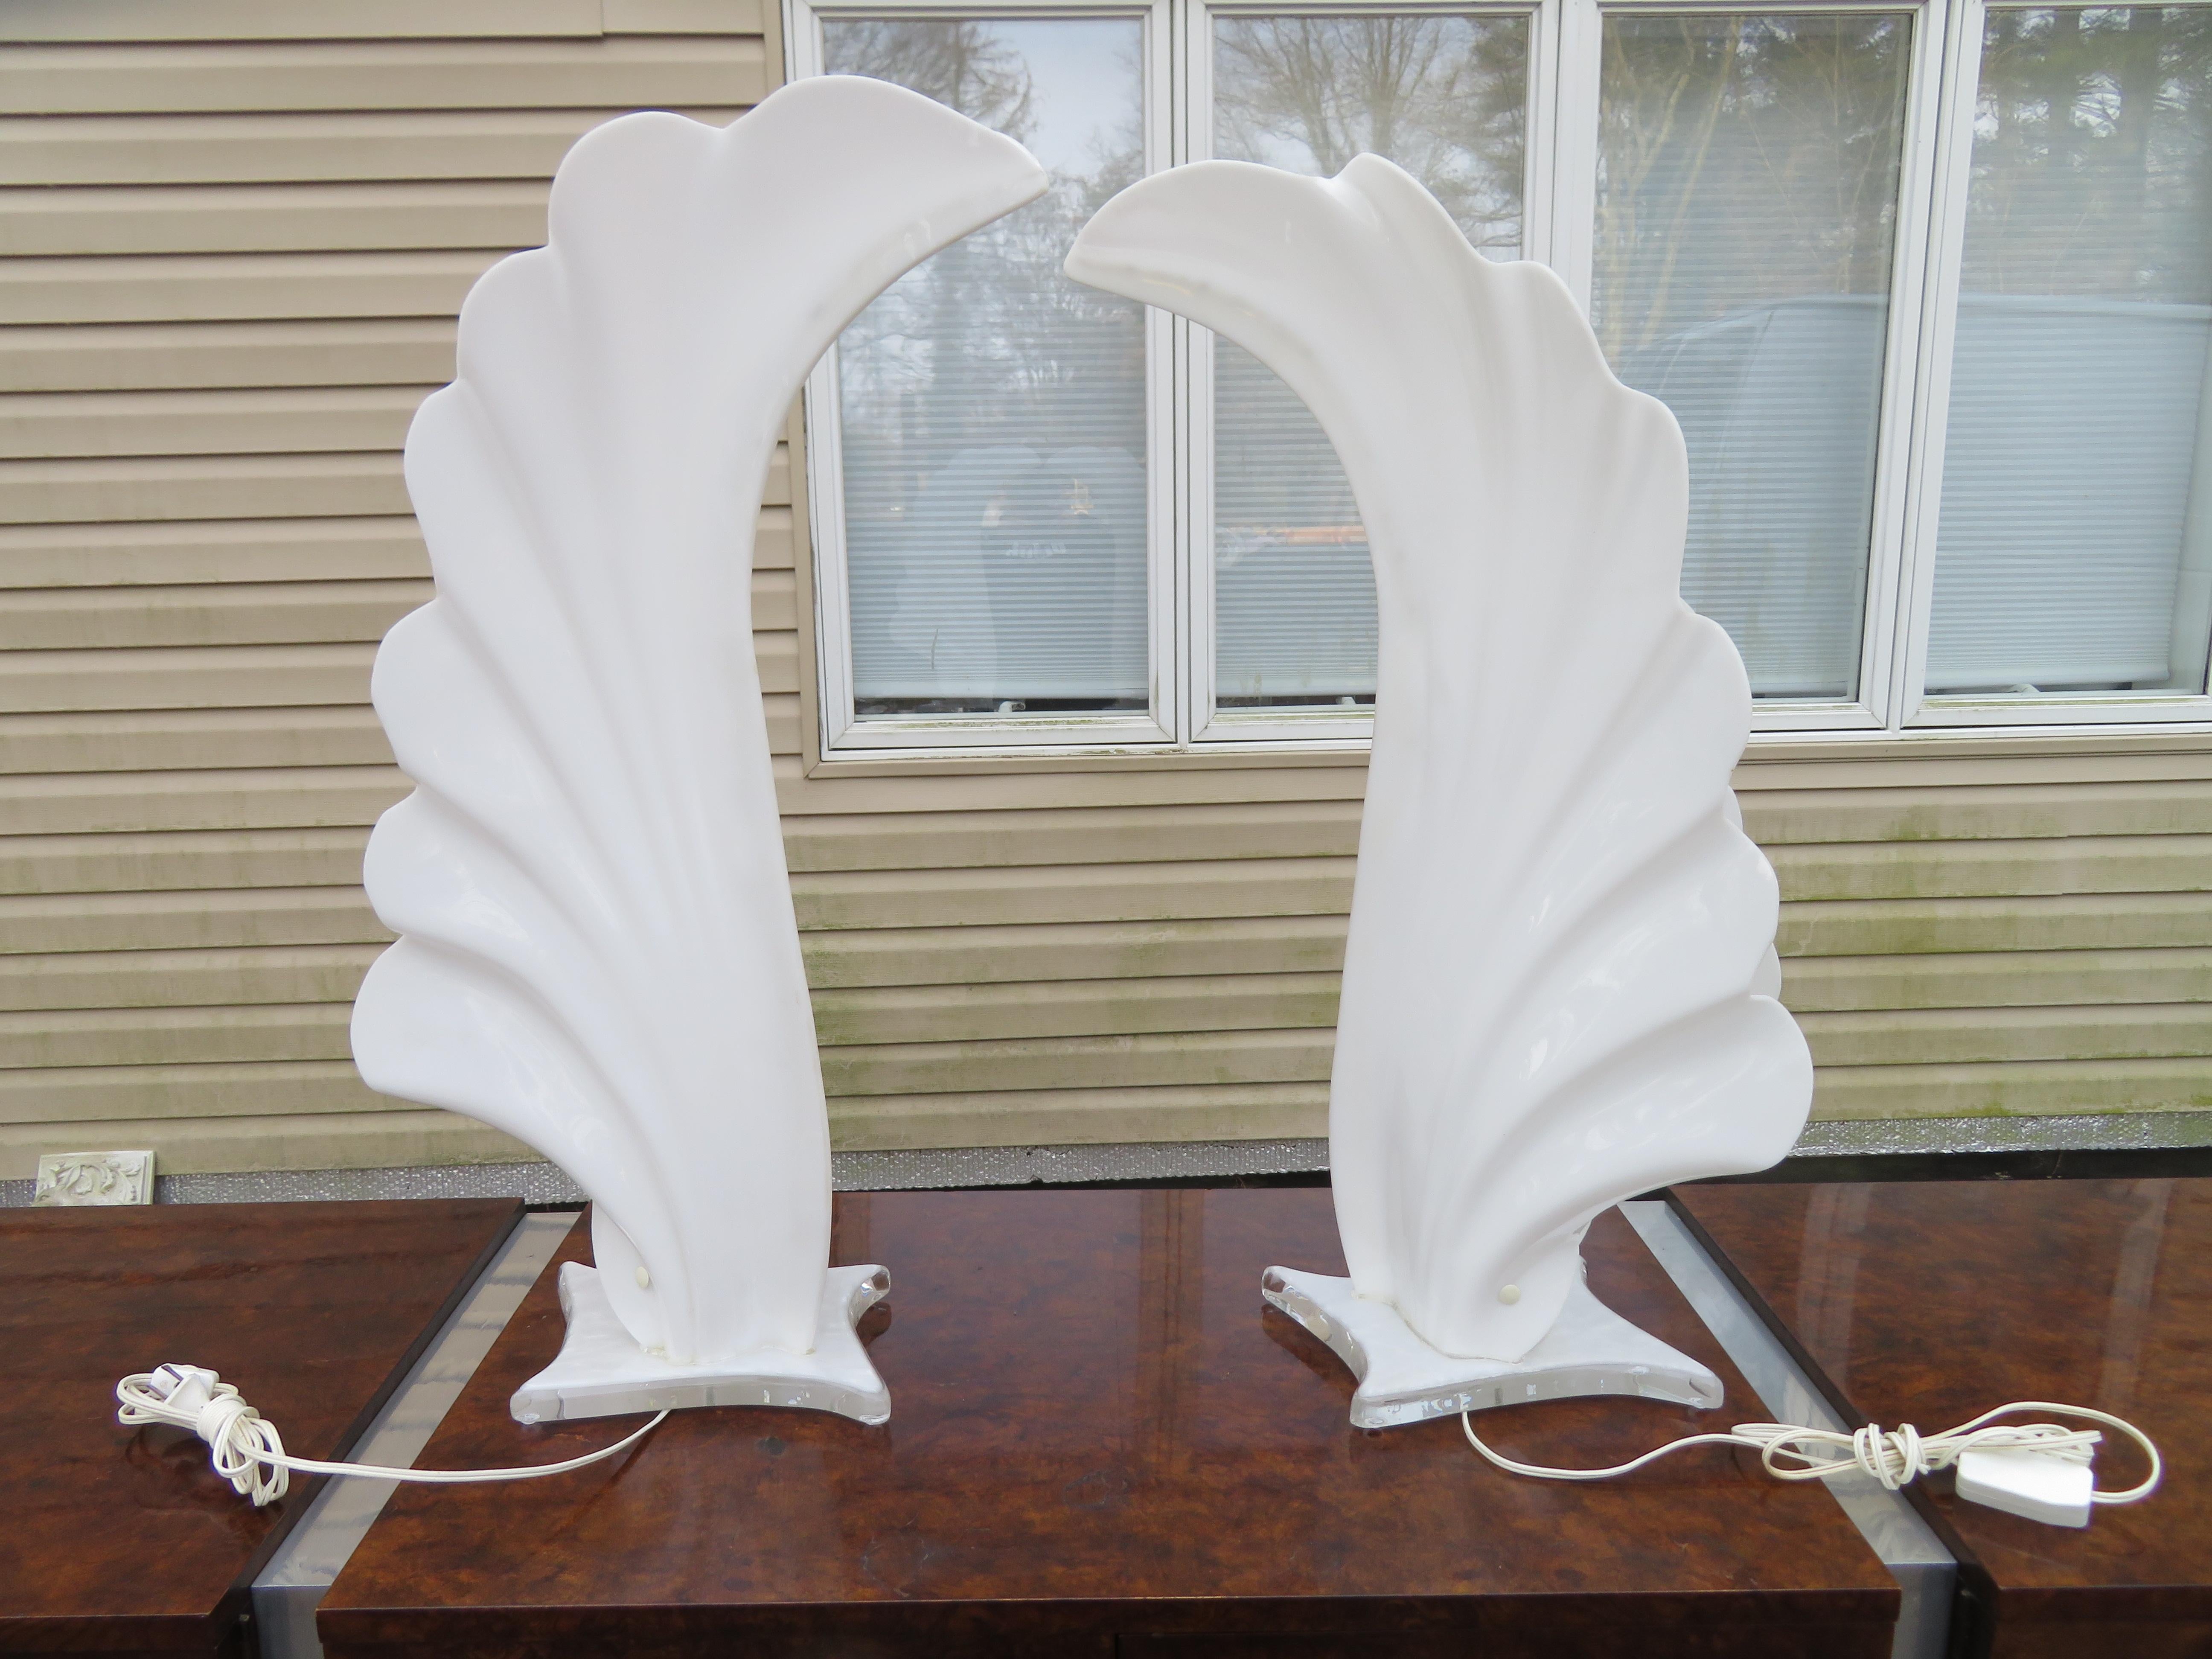 Superb Pair of Monumental White Acrylic Flower Table Lamp by Rougier In Good Condition For Sale In Pemberton, NJ